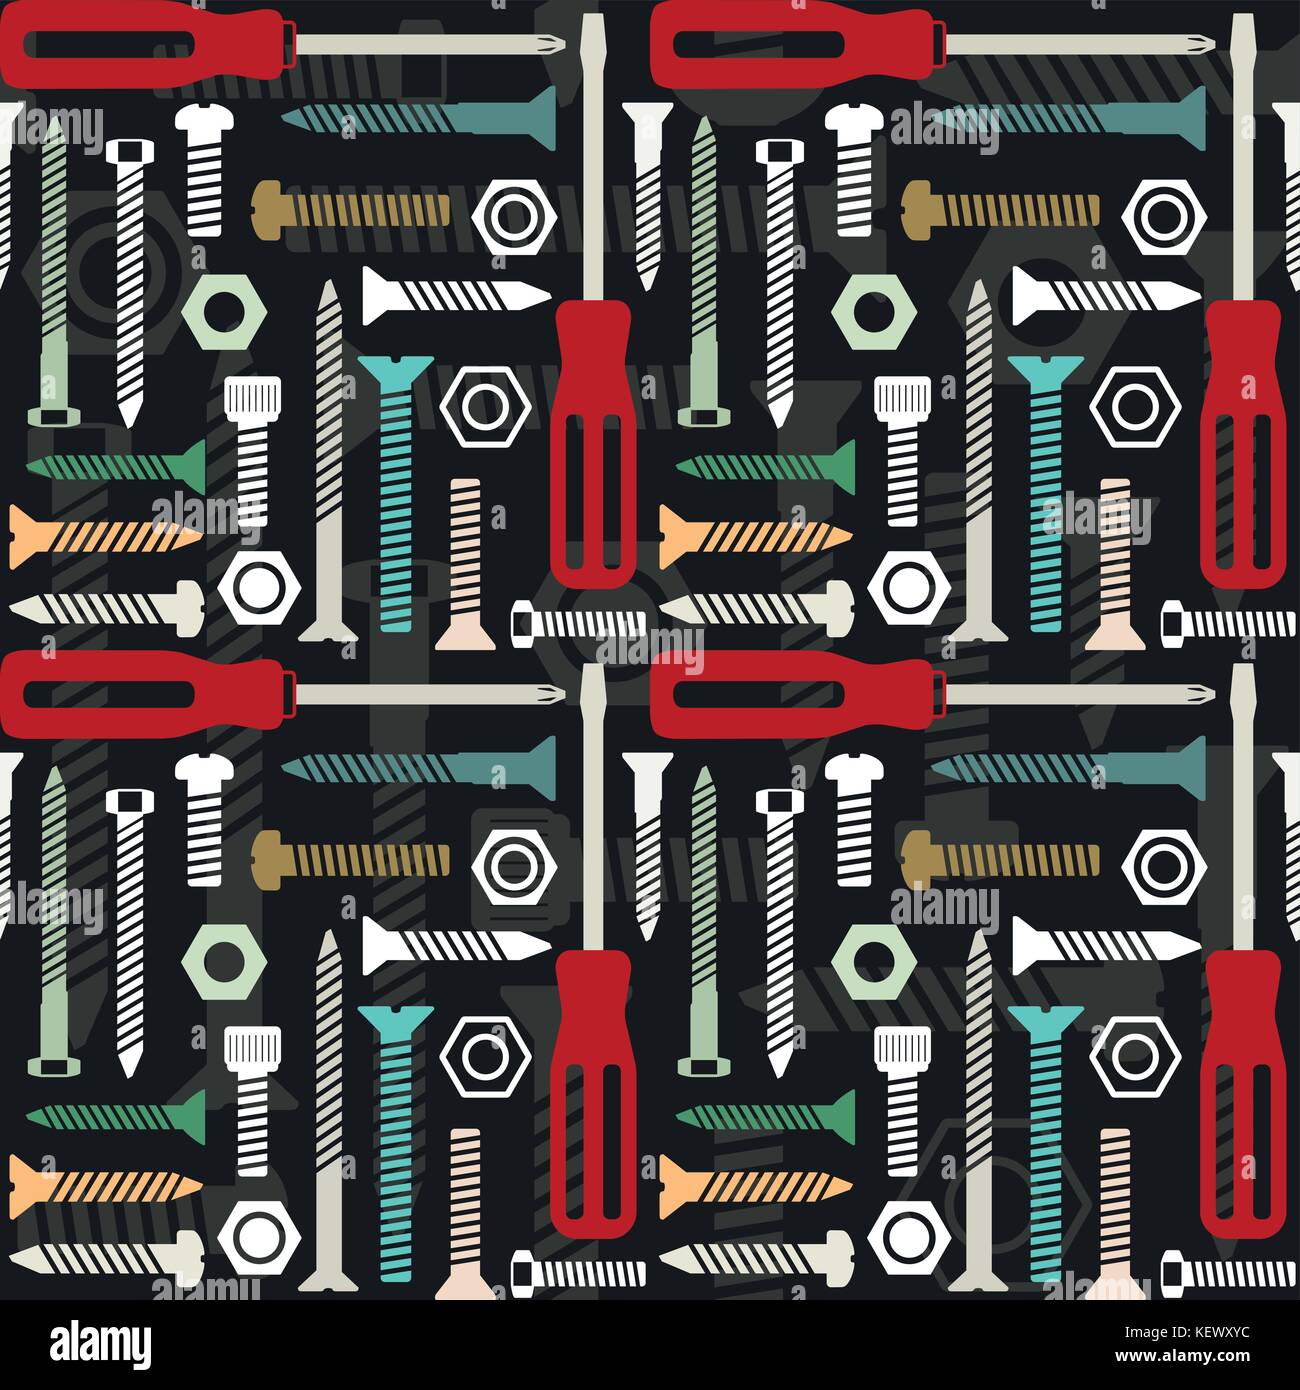 Seamless pattern background with screws and screwdrivers. Stock Vector